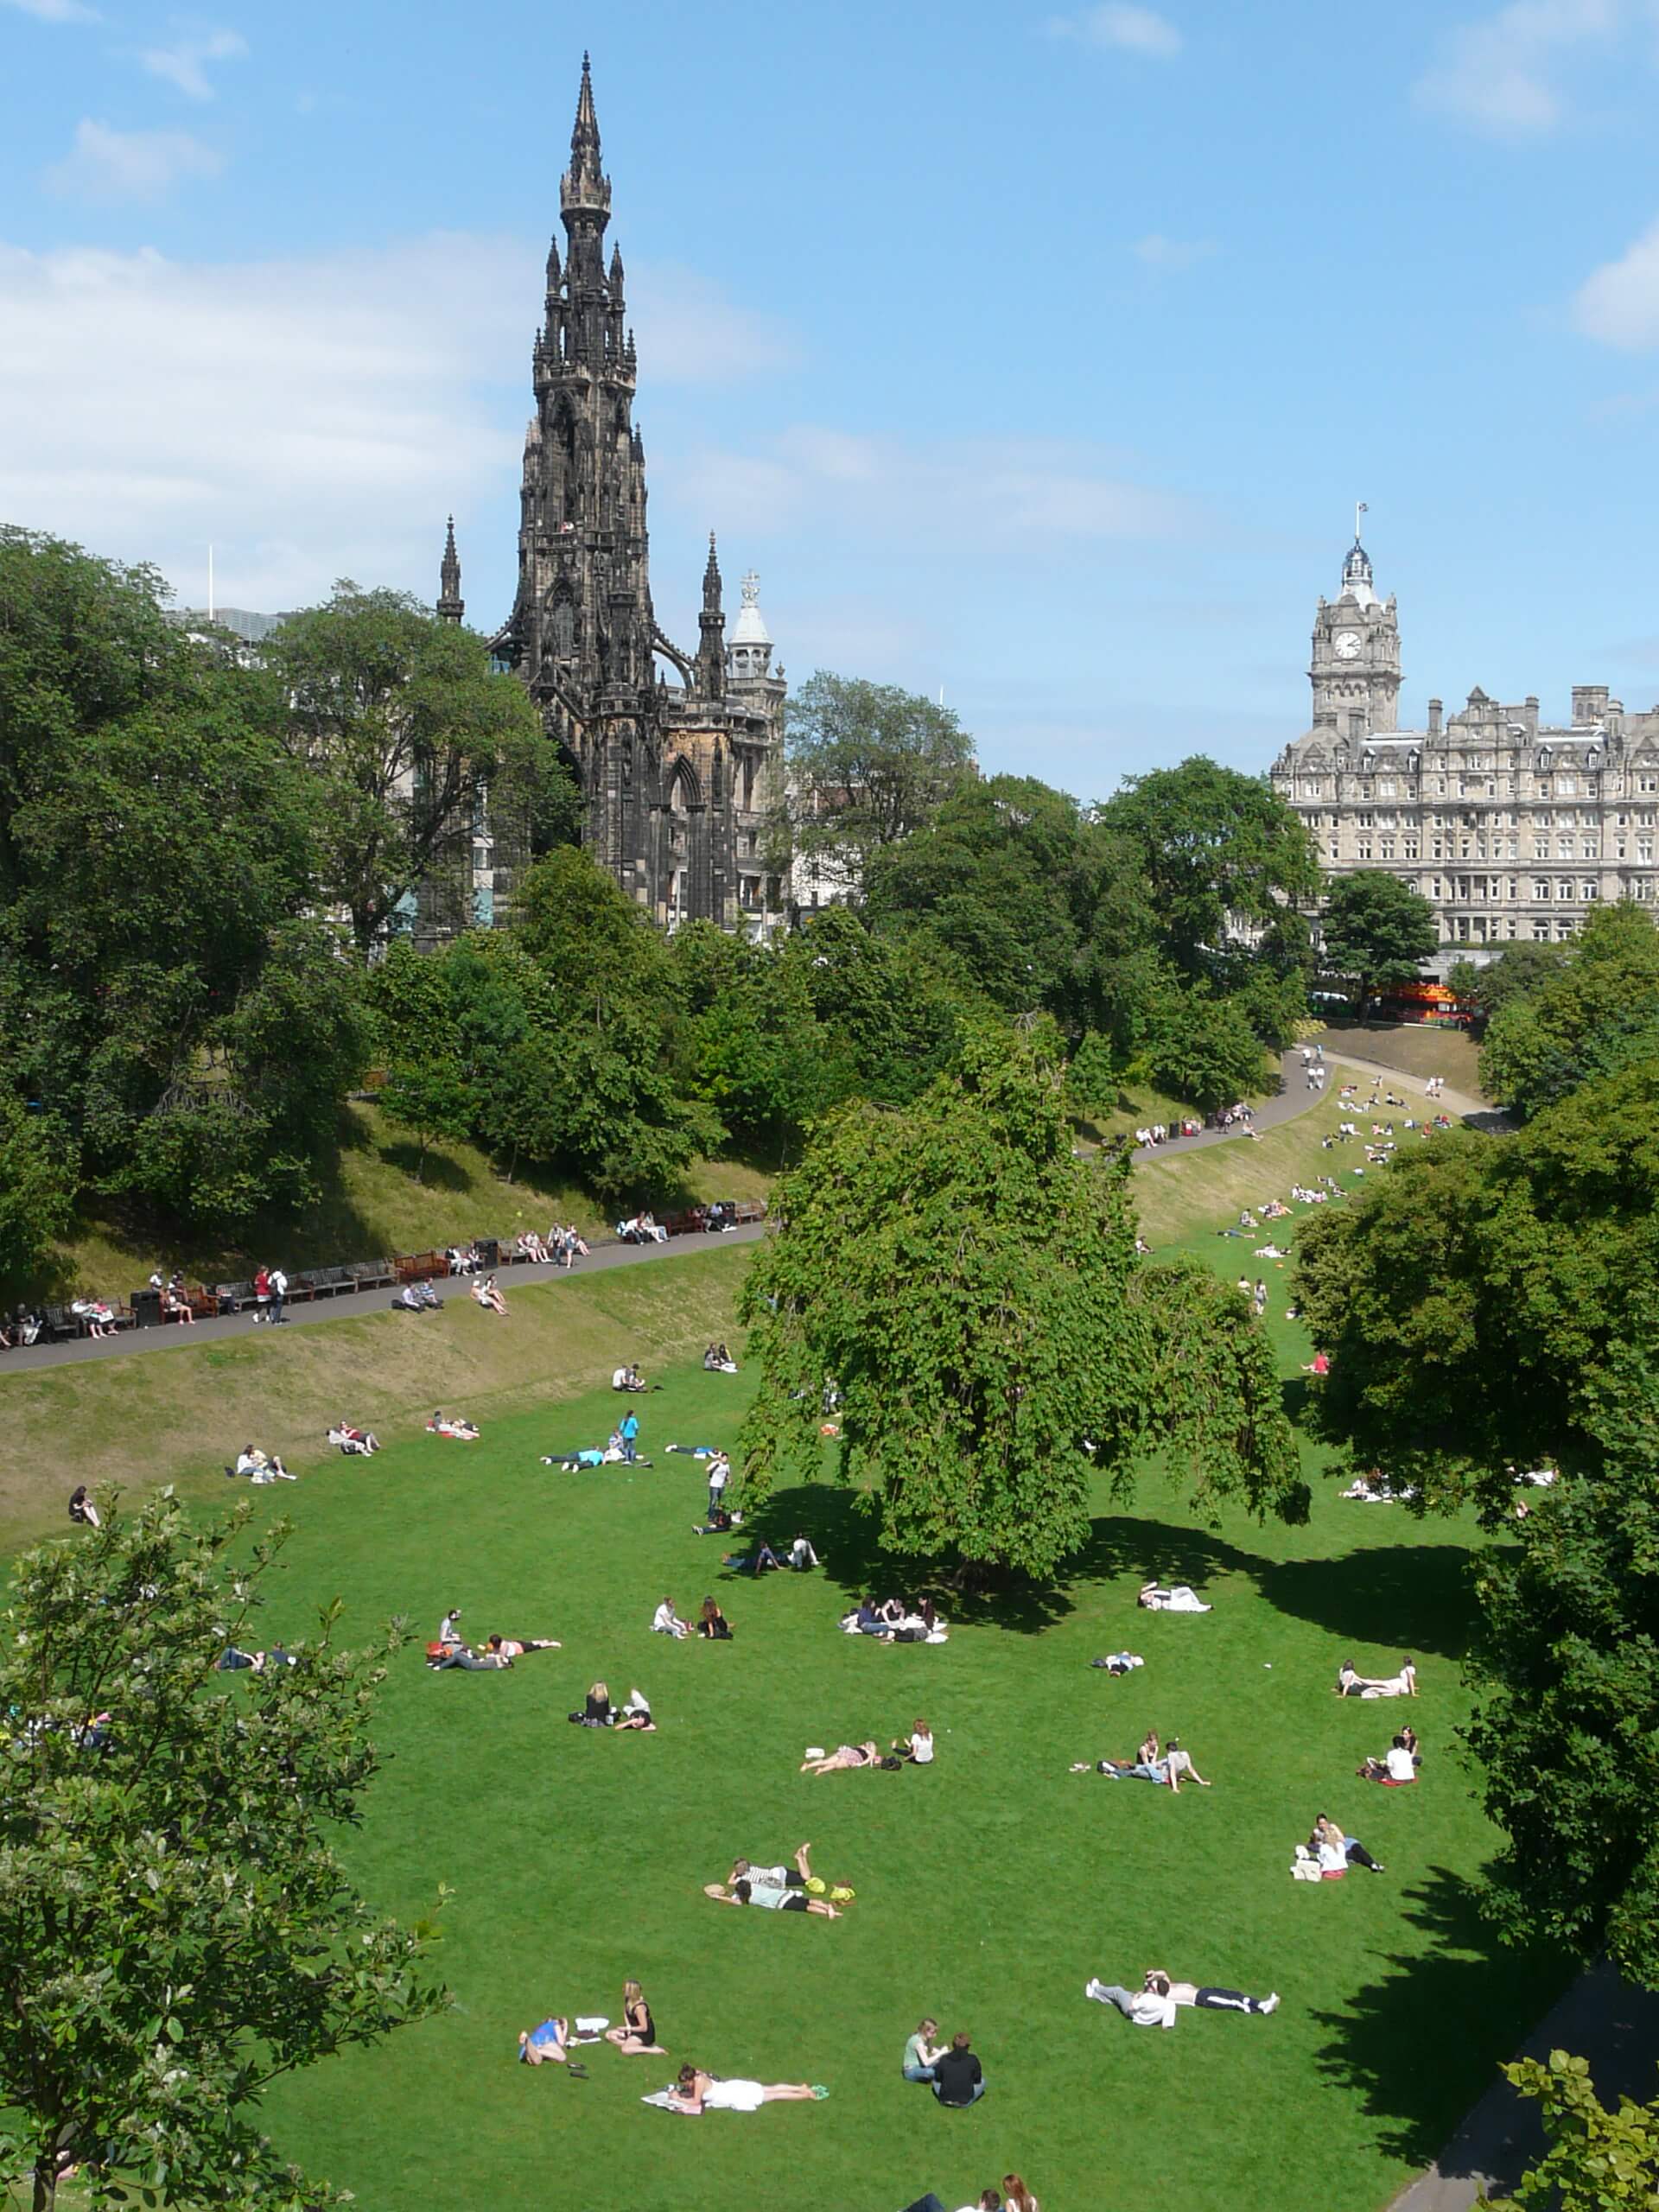 Relaxing in the shadow of the Scott Monument © Norman Miller